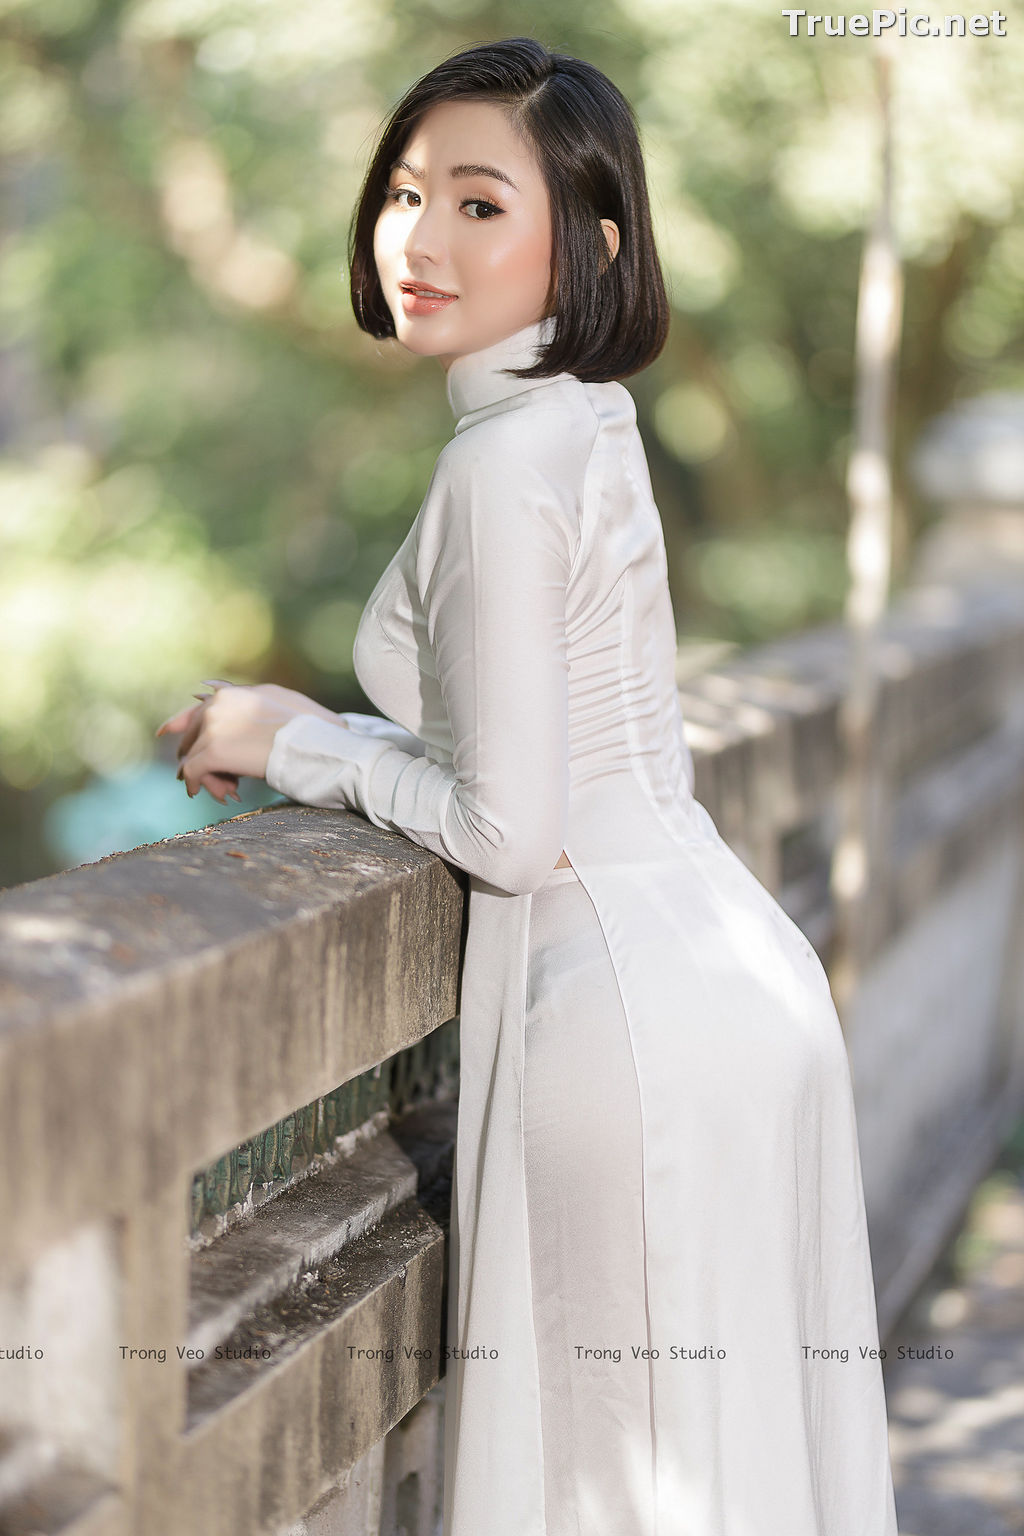 Image The Beauty of Vietnamese Girls with Traditional Dress (Ao Dai) #2 - TruePic.net - Picture-82